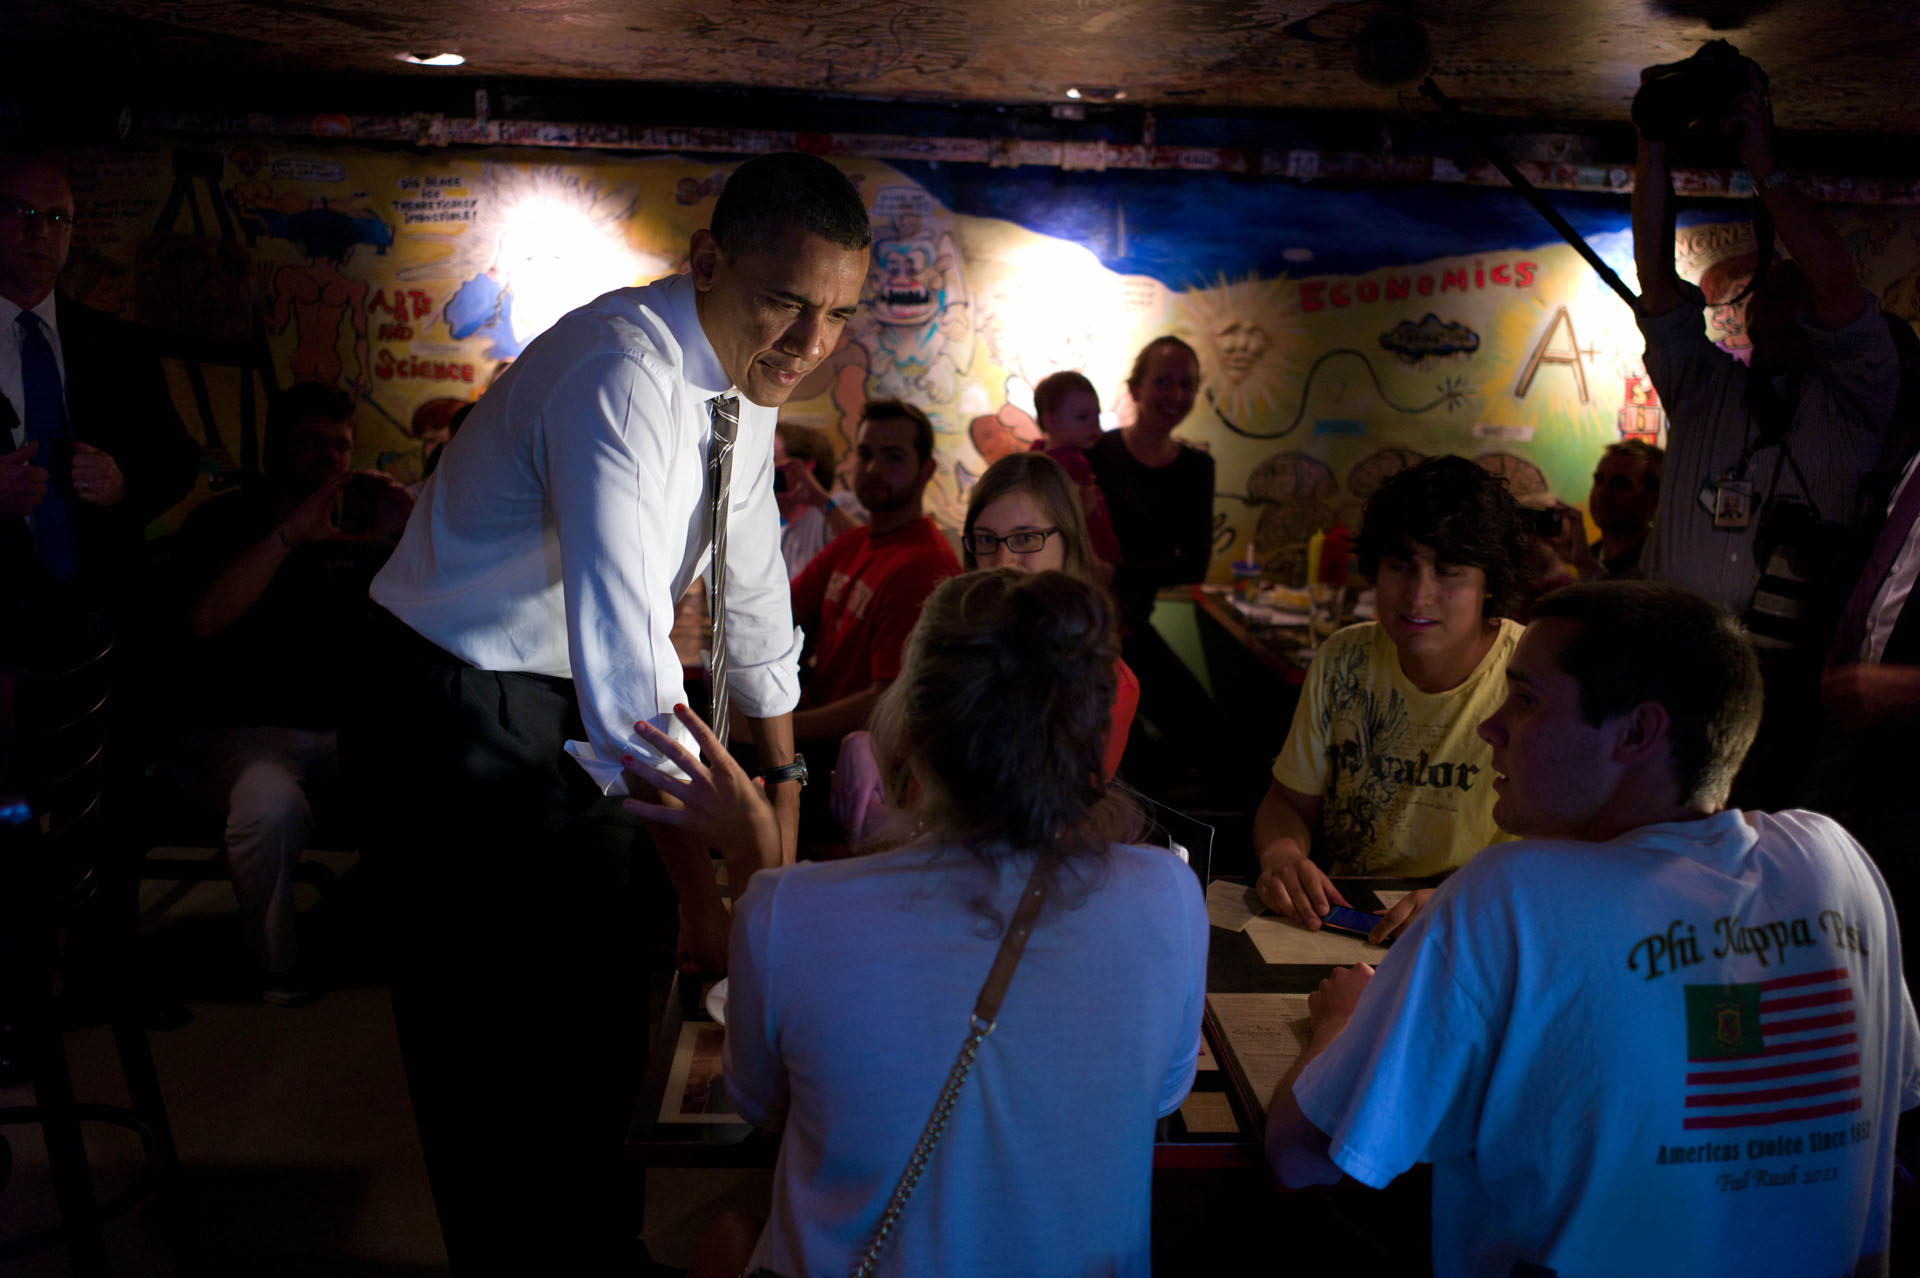 President Obama talks to patrons at the Sink in Boulder, Colo